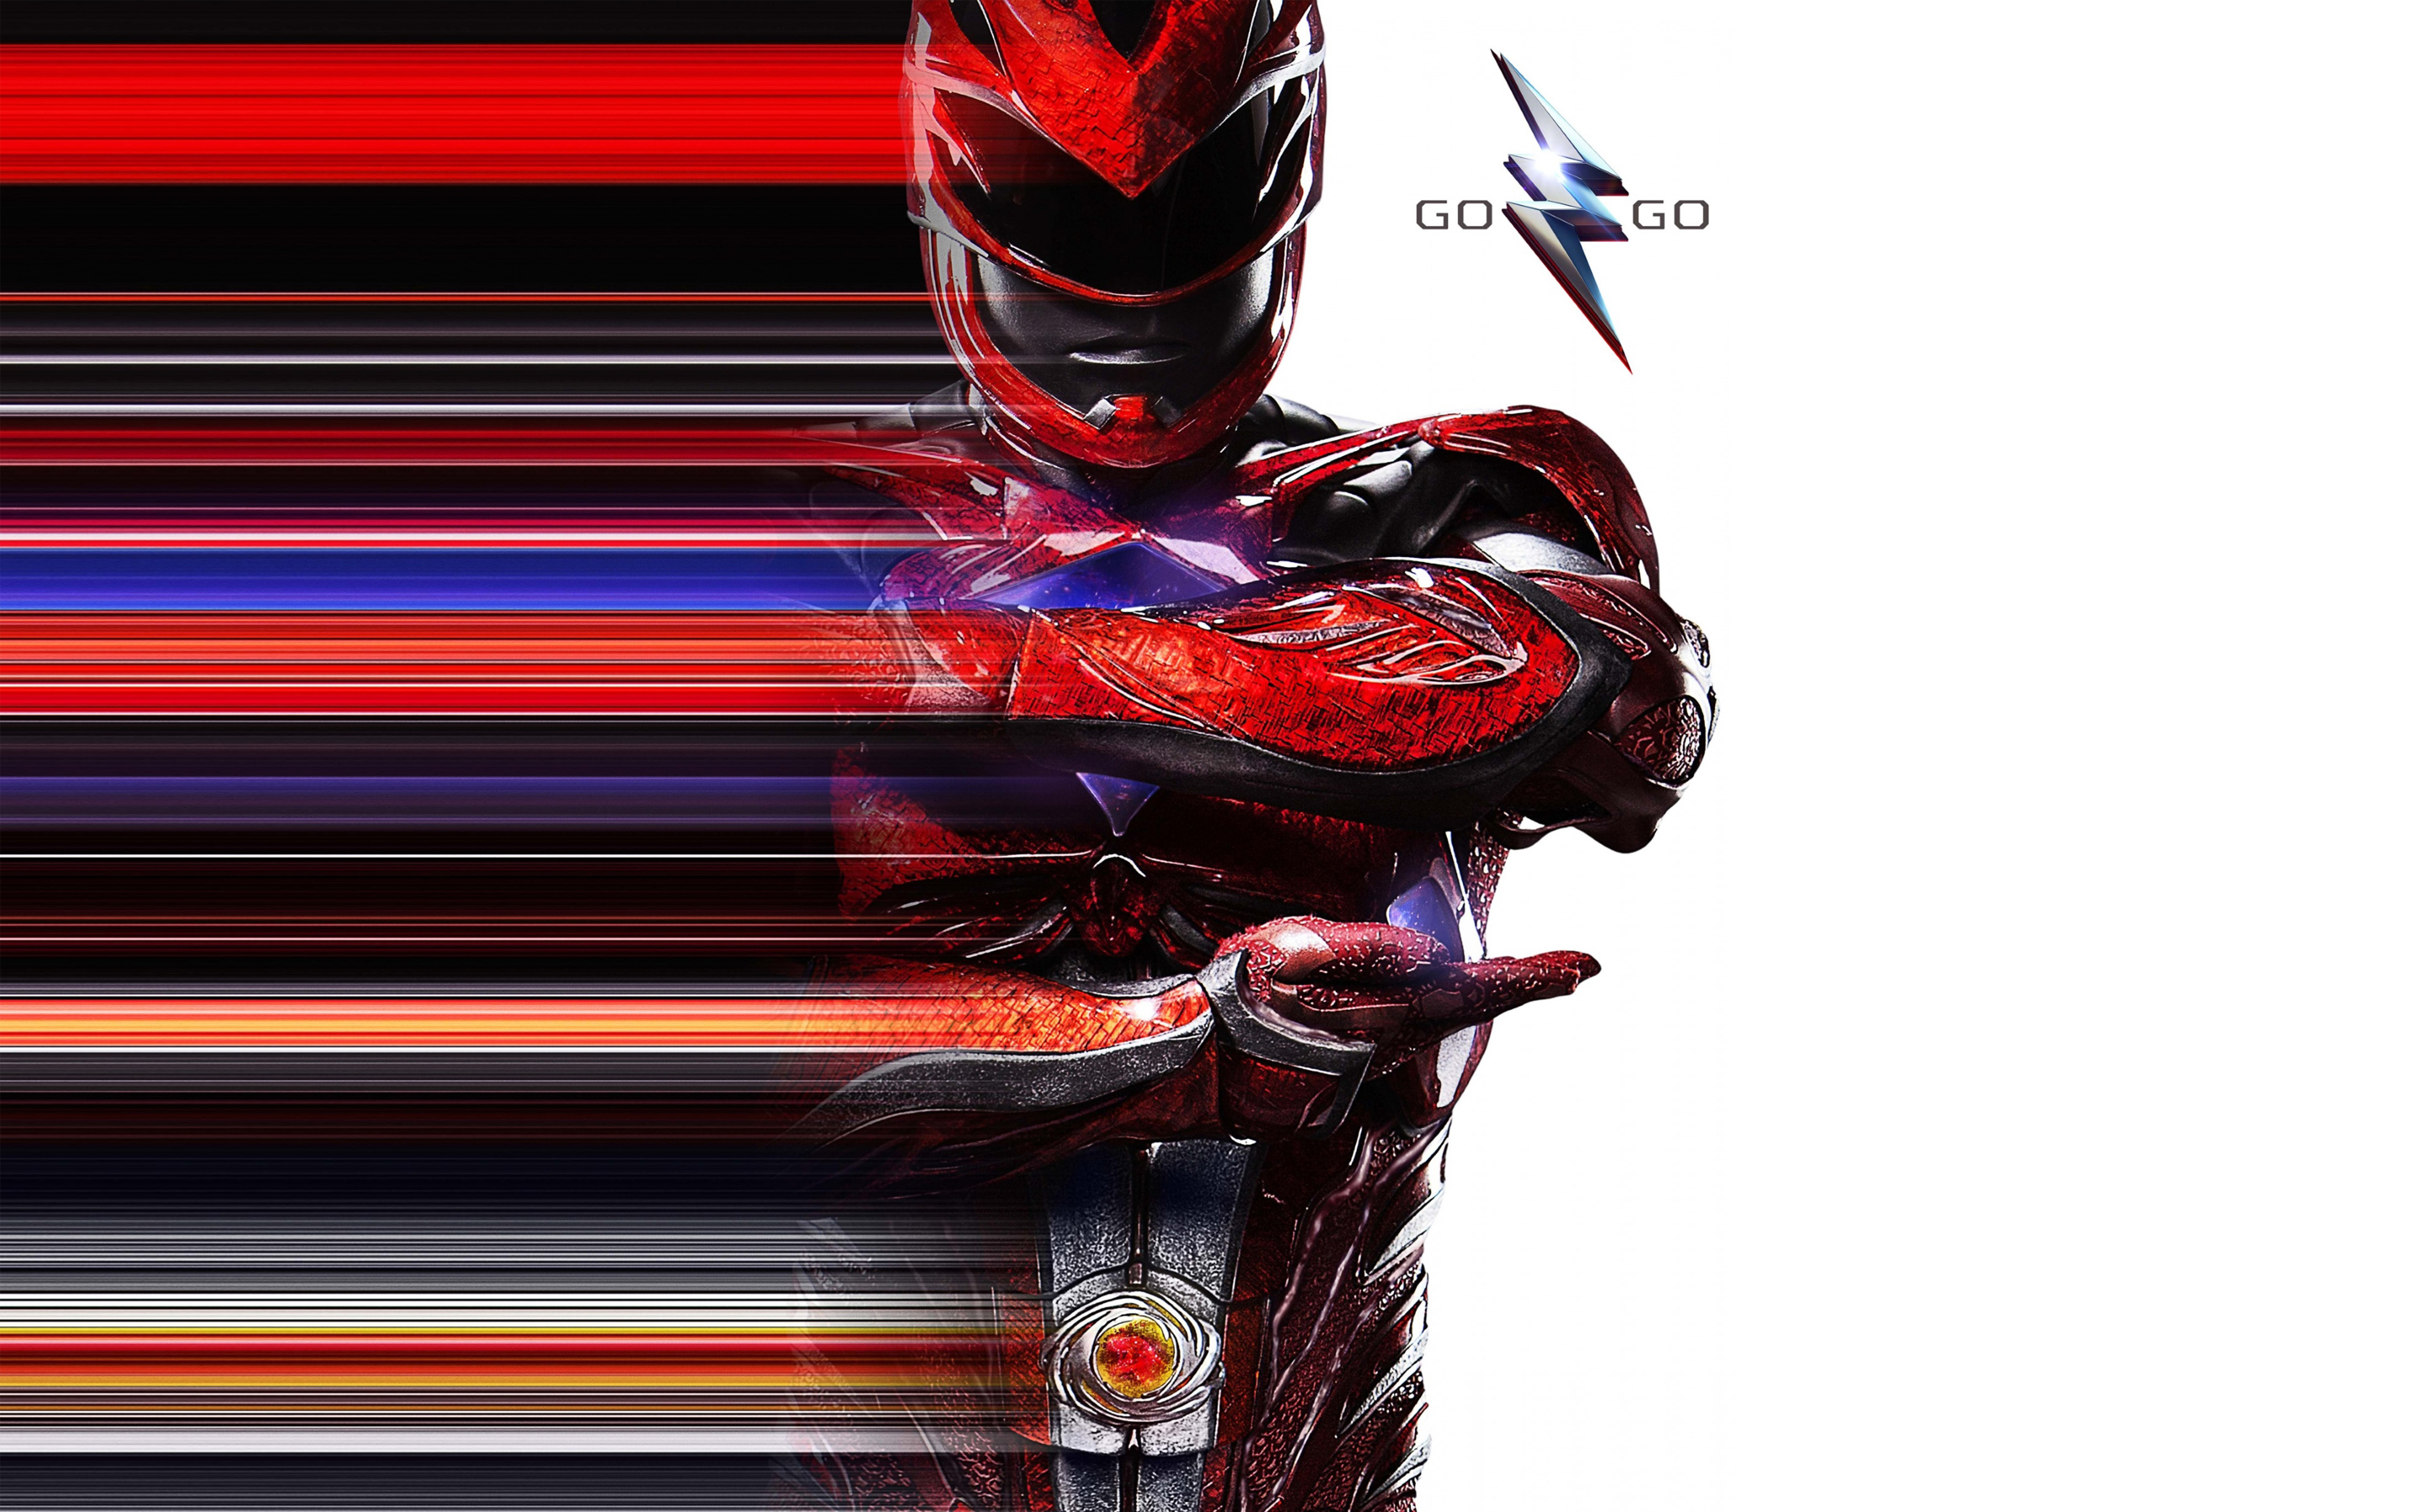 Red Ranger Power Rangers 2017, HD Movies, 4k Wallpapers, Image, Backgrounds...